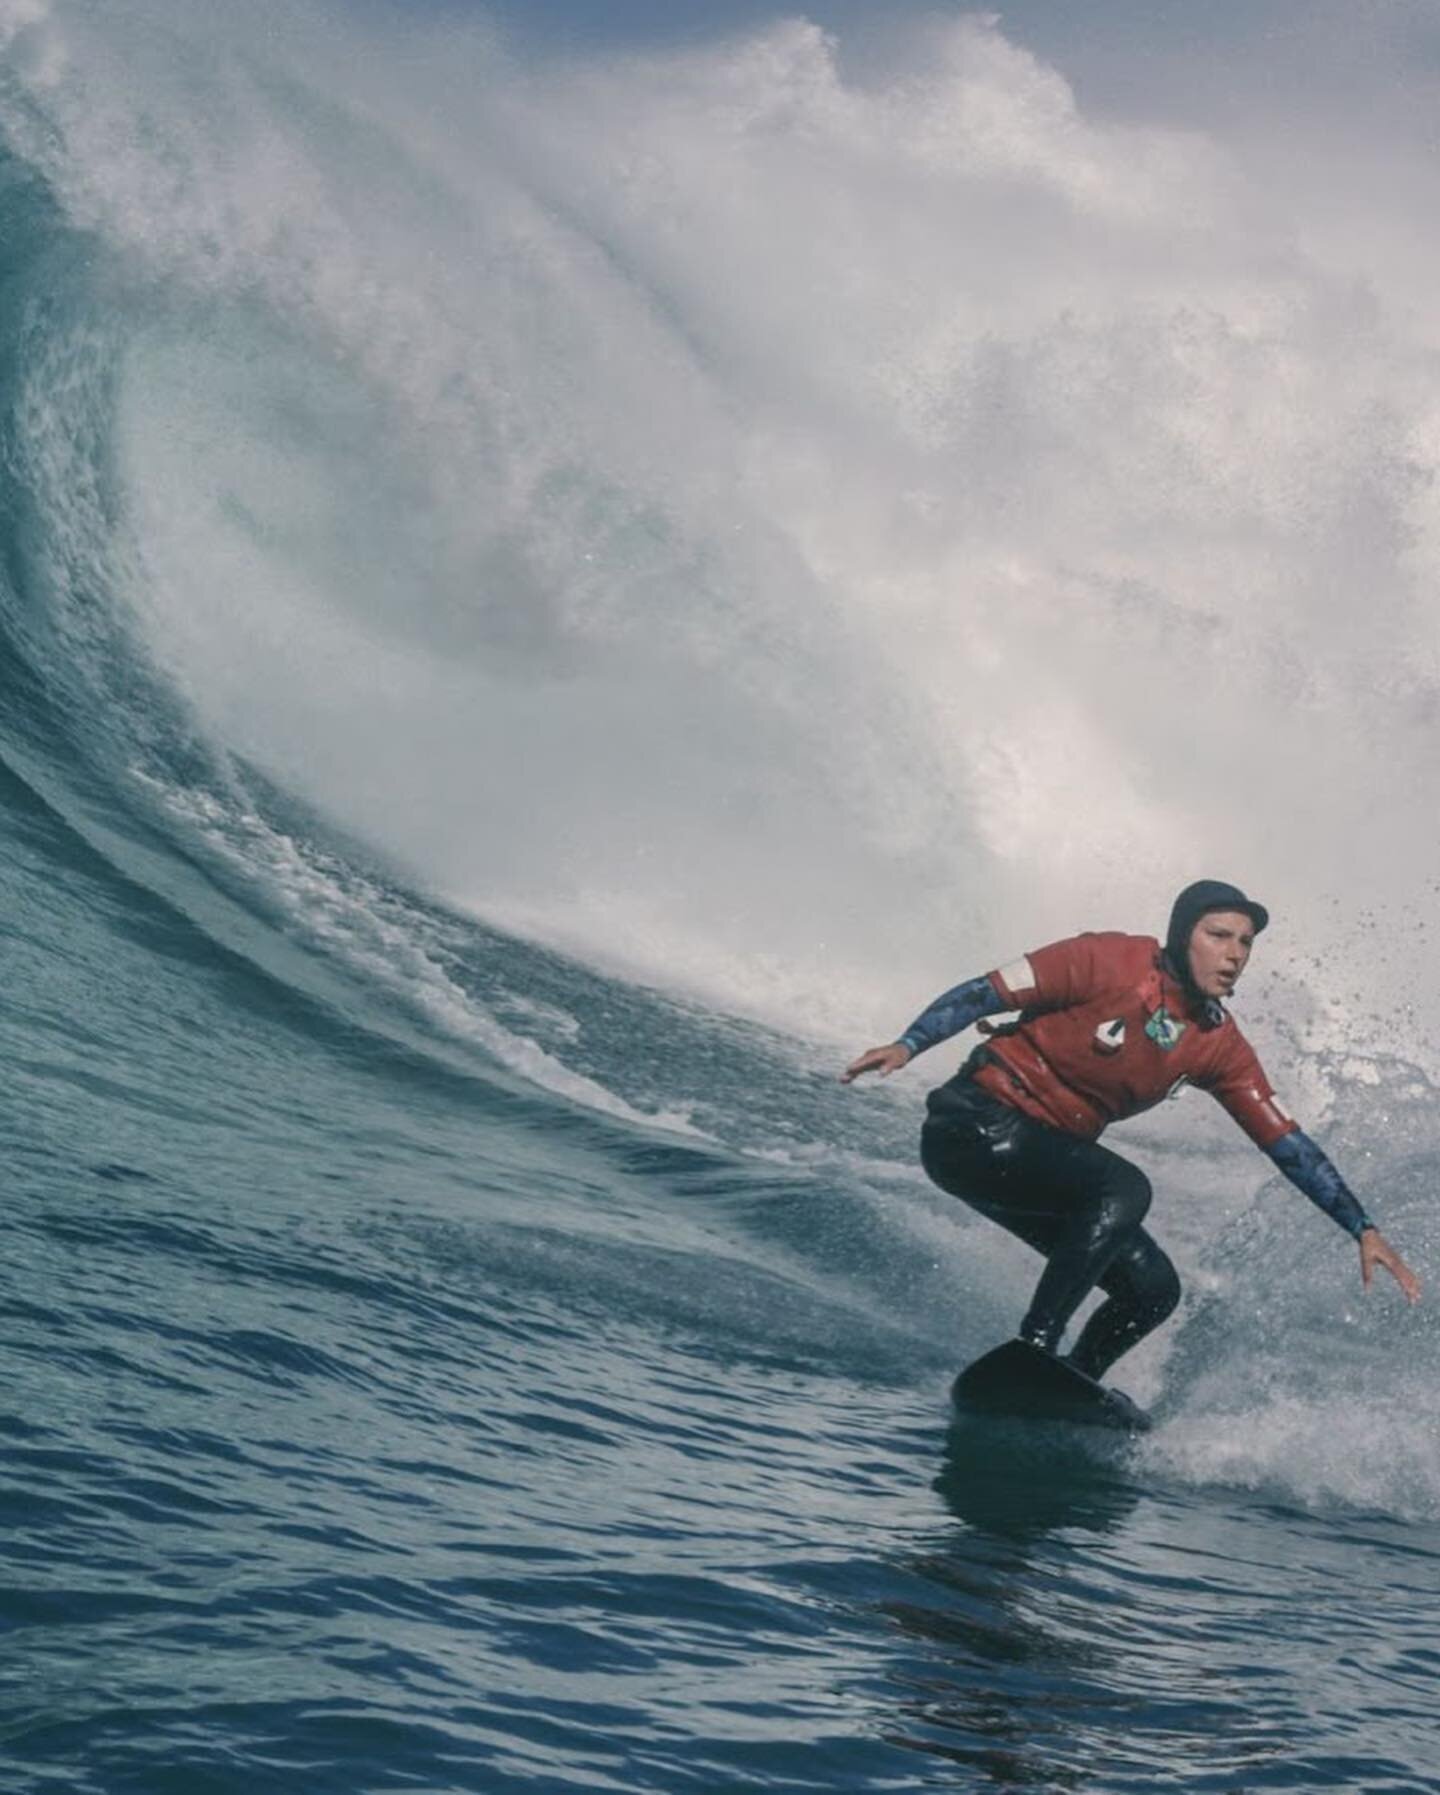 Fresh off its TIFF World Premiere, here is my latest review for &lsquo;Maya and the Wave&rsquo; directed by Stephanie Johnes. For her latest directorial effort,  Johnes centers her focus on showcasing the incredible life and calling of Brazilian surf